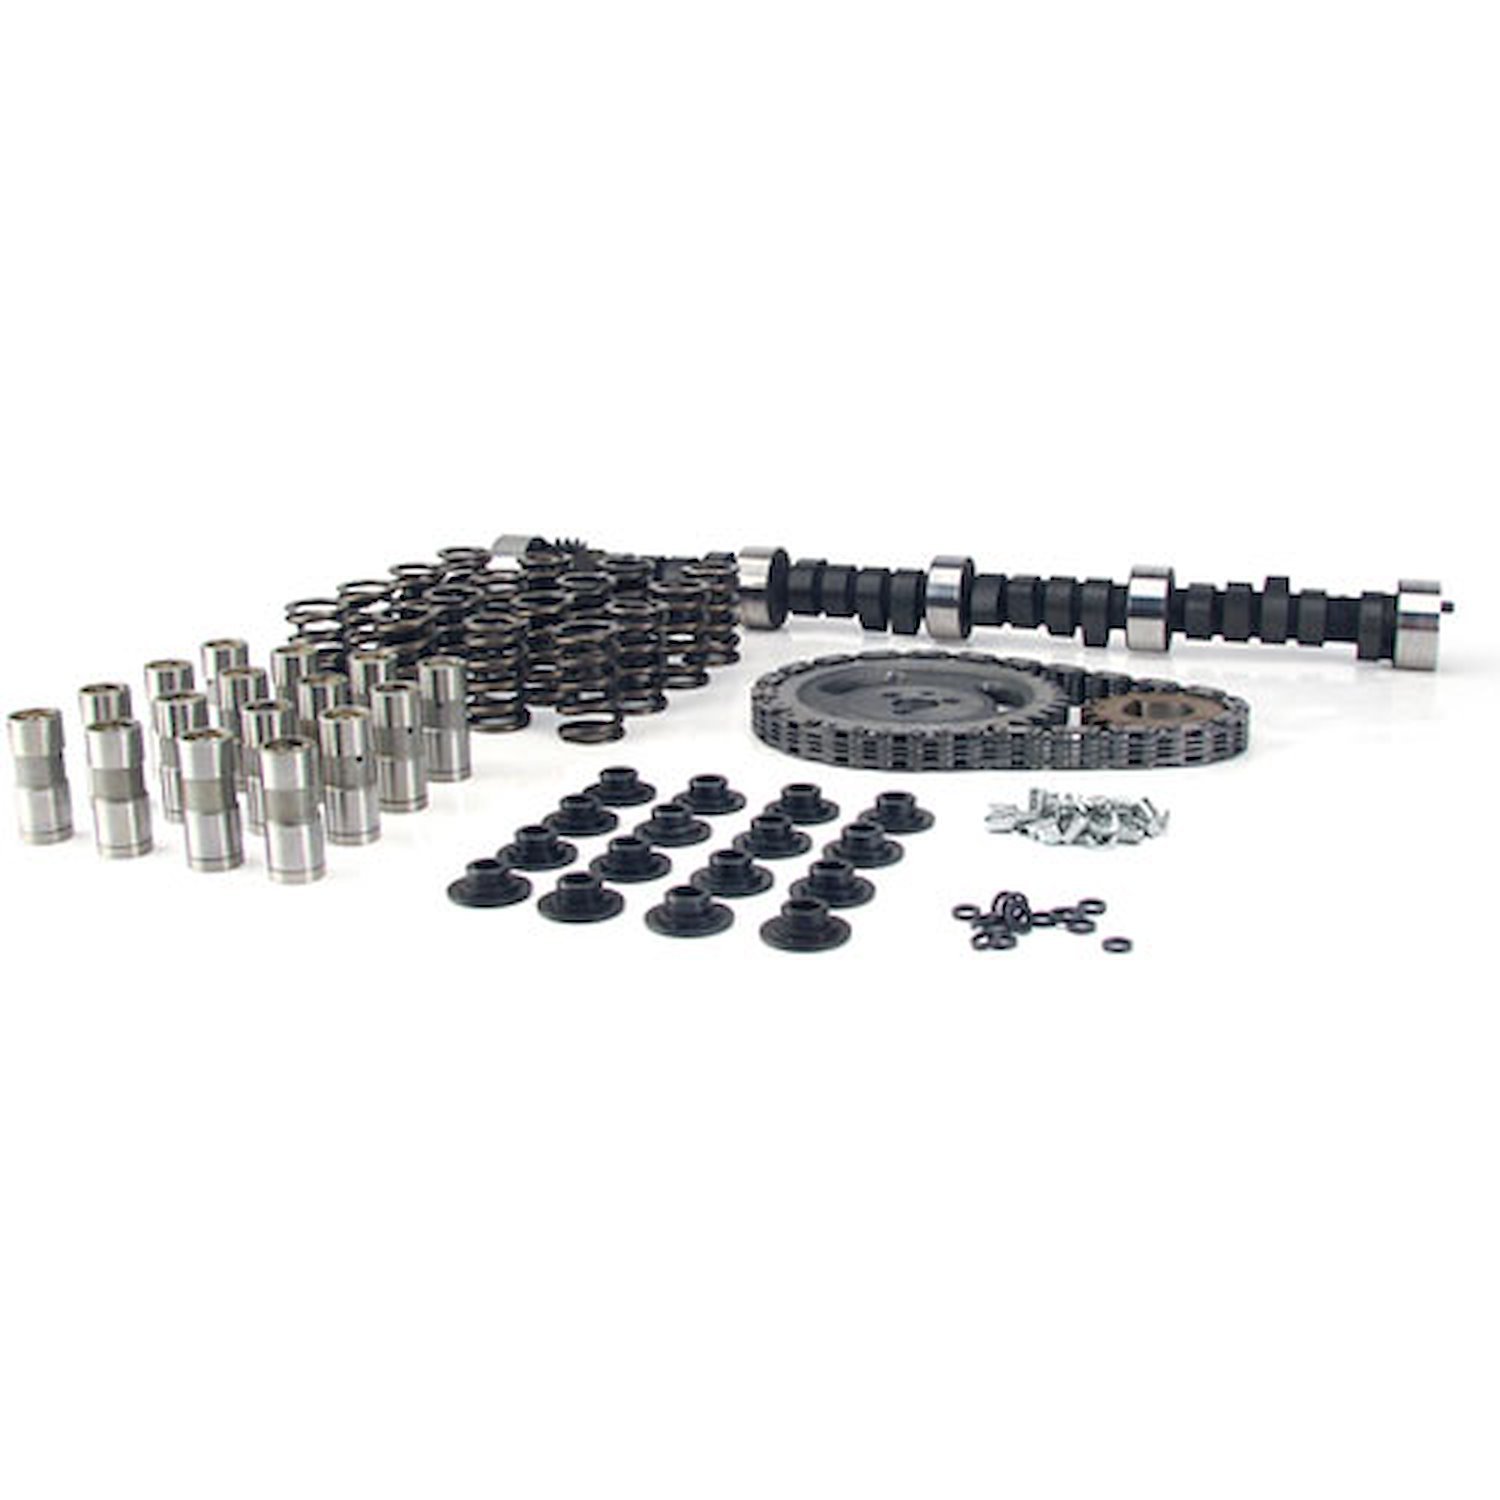 High Energy 268H Hydraulic Flat Tappet Camshaft Complete Kit Lift: .485" /.485" Duration: 268°/268° RPM Range: 1500-5500